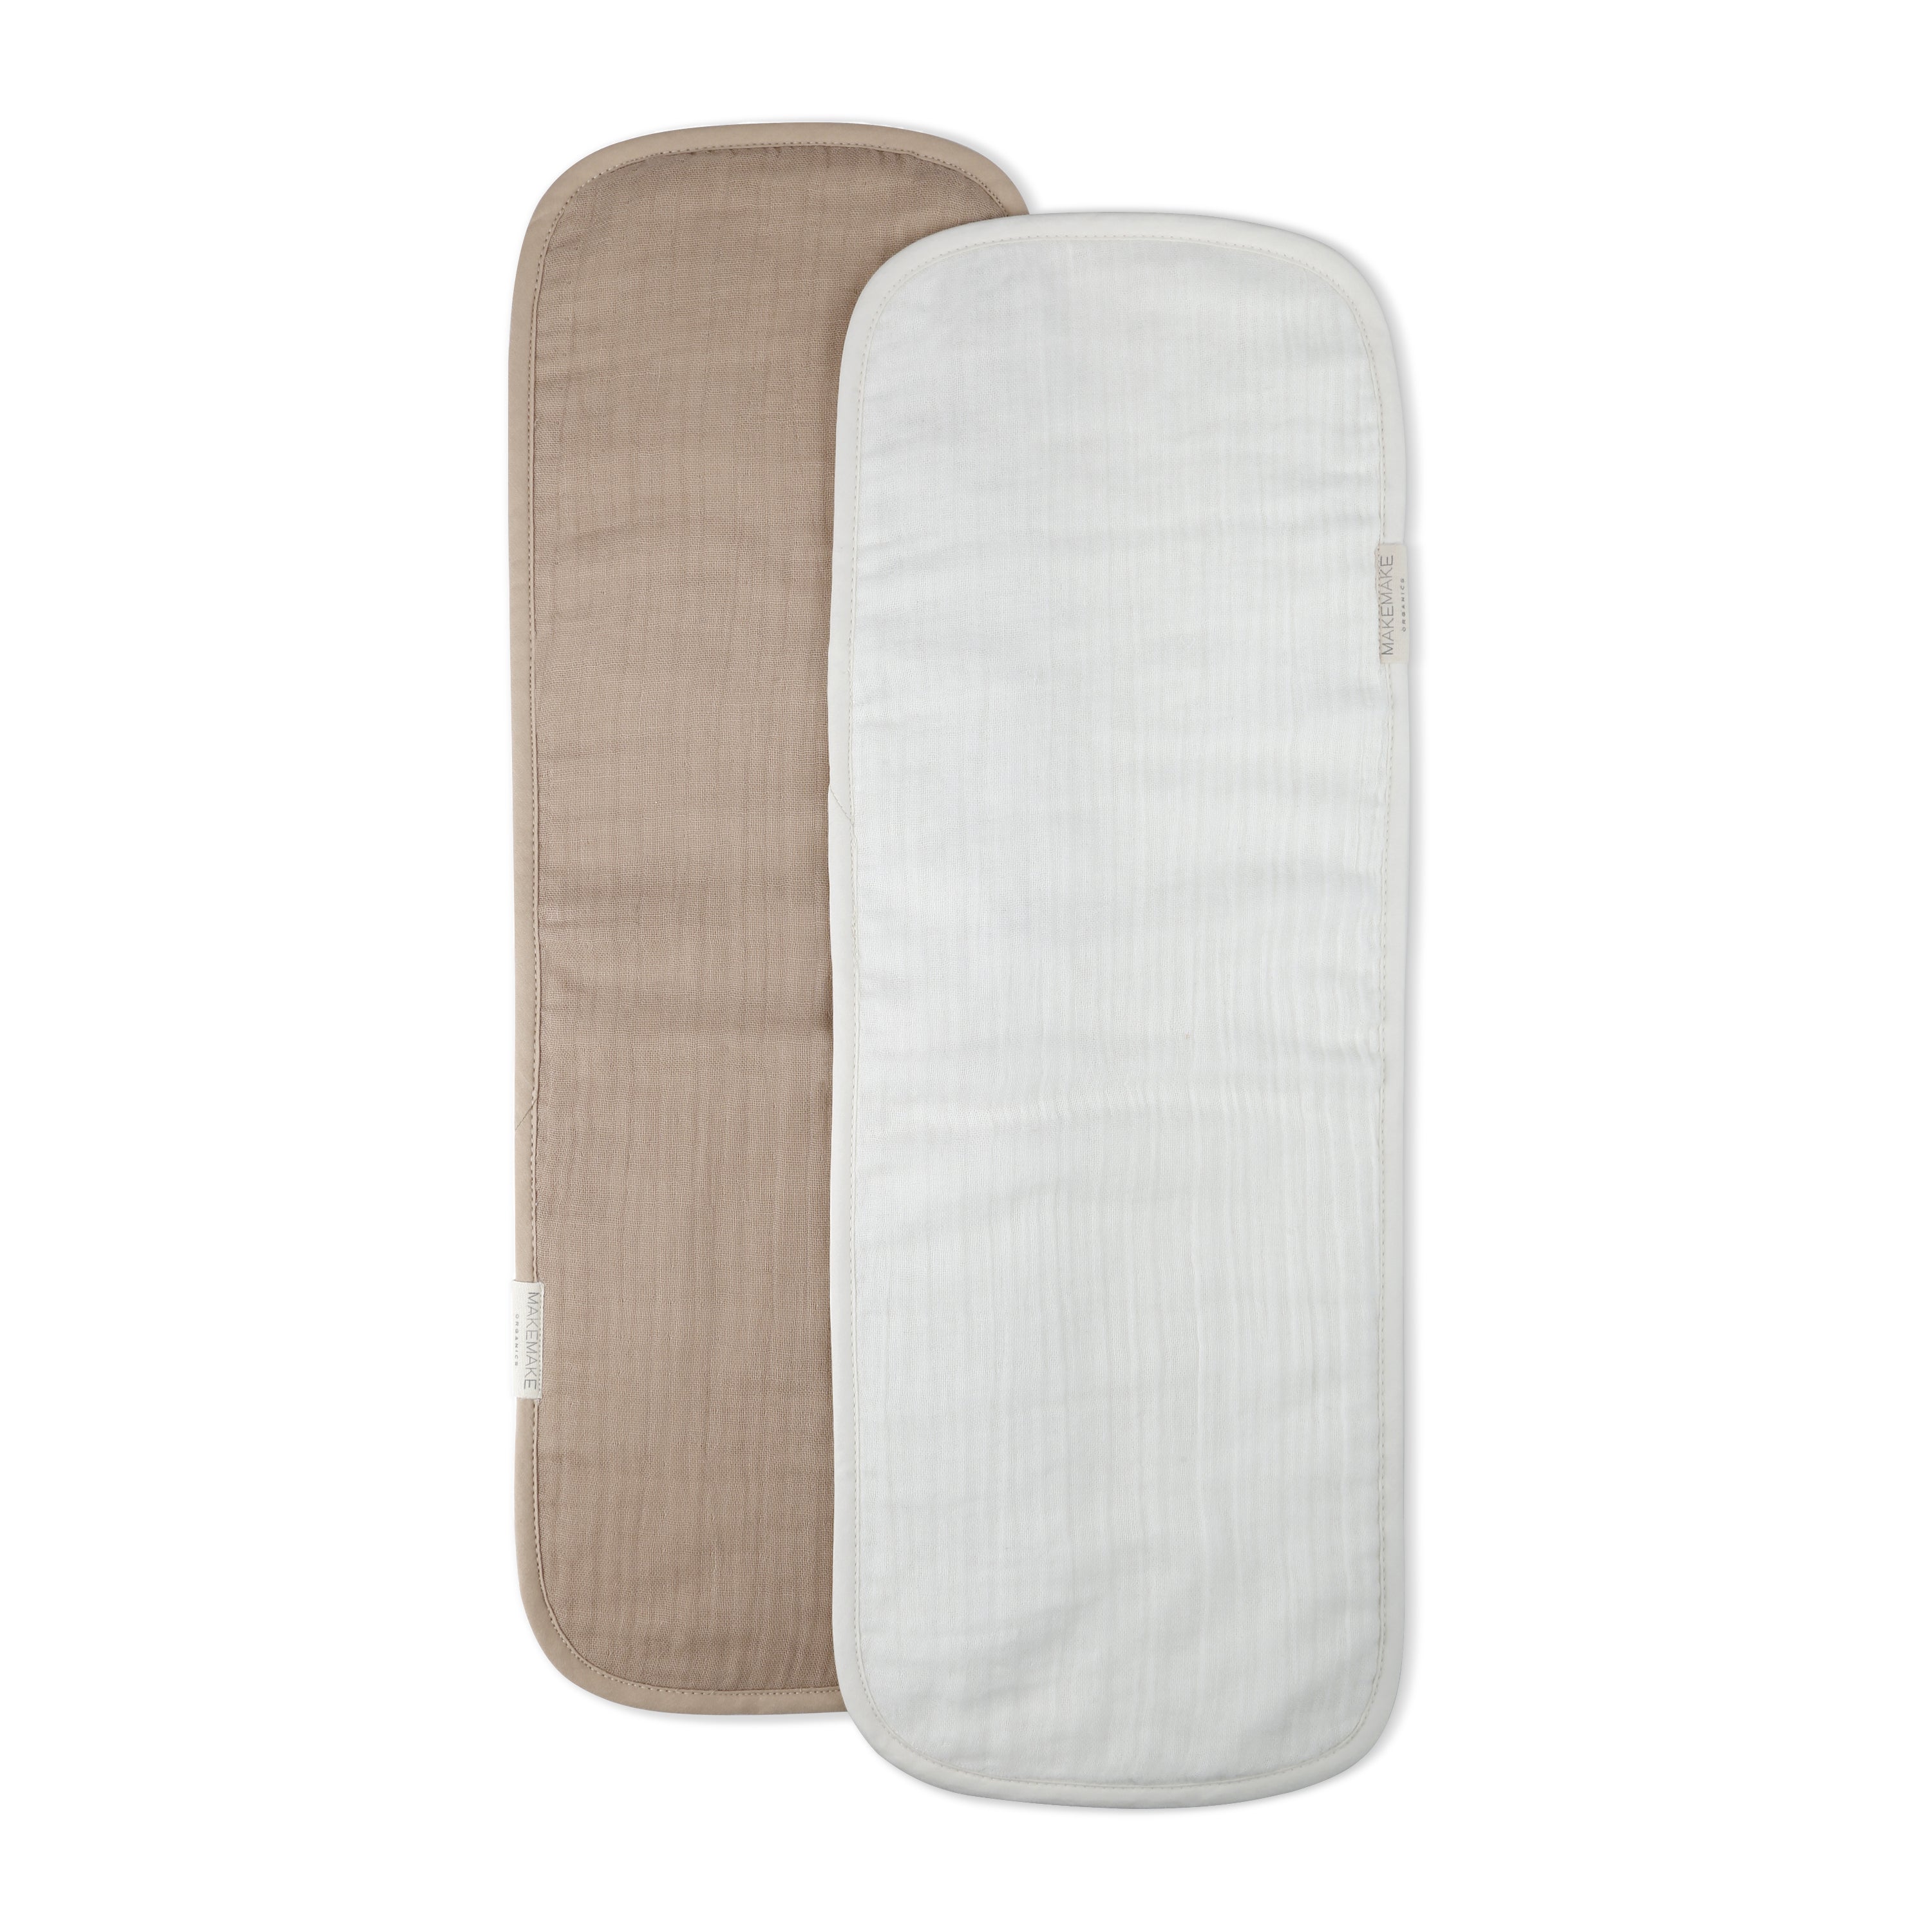 Two Organic Cotton Muslin Burp Cloths in Ivory & Taupe on a white background, one in beige and the other in white, both with visible tags on the side. Brand: Makemake Organics.